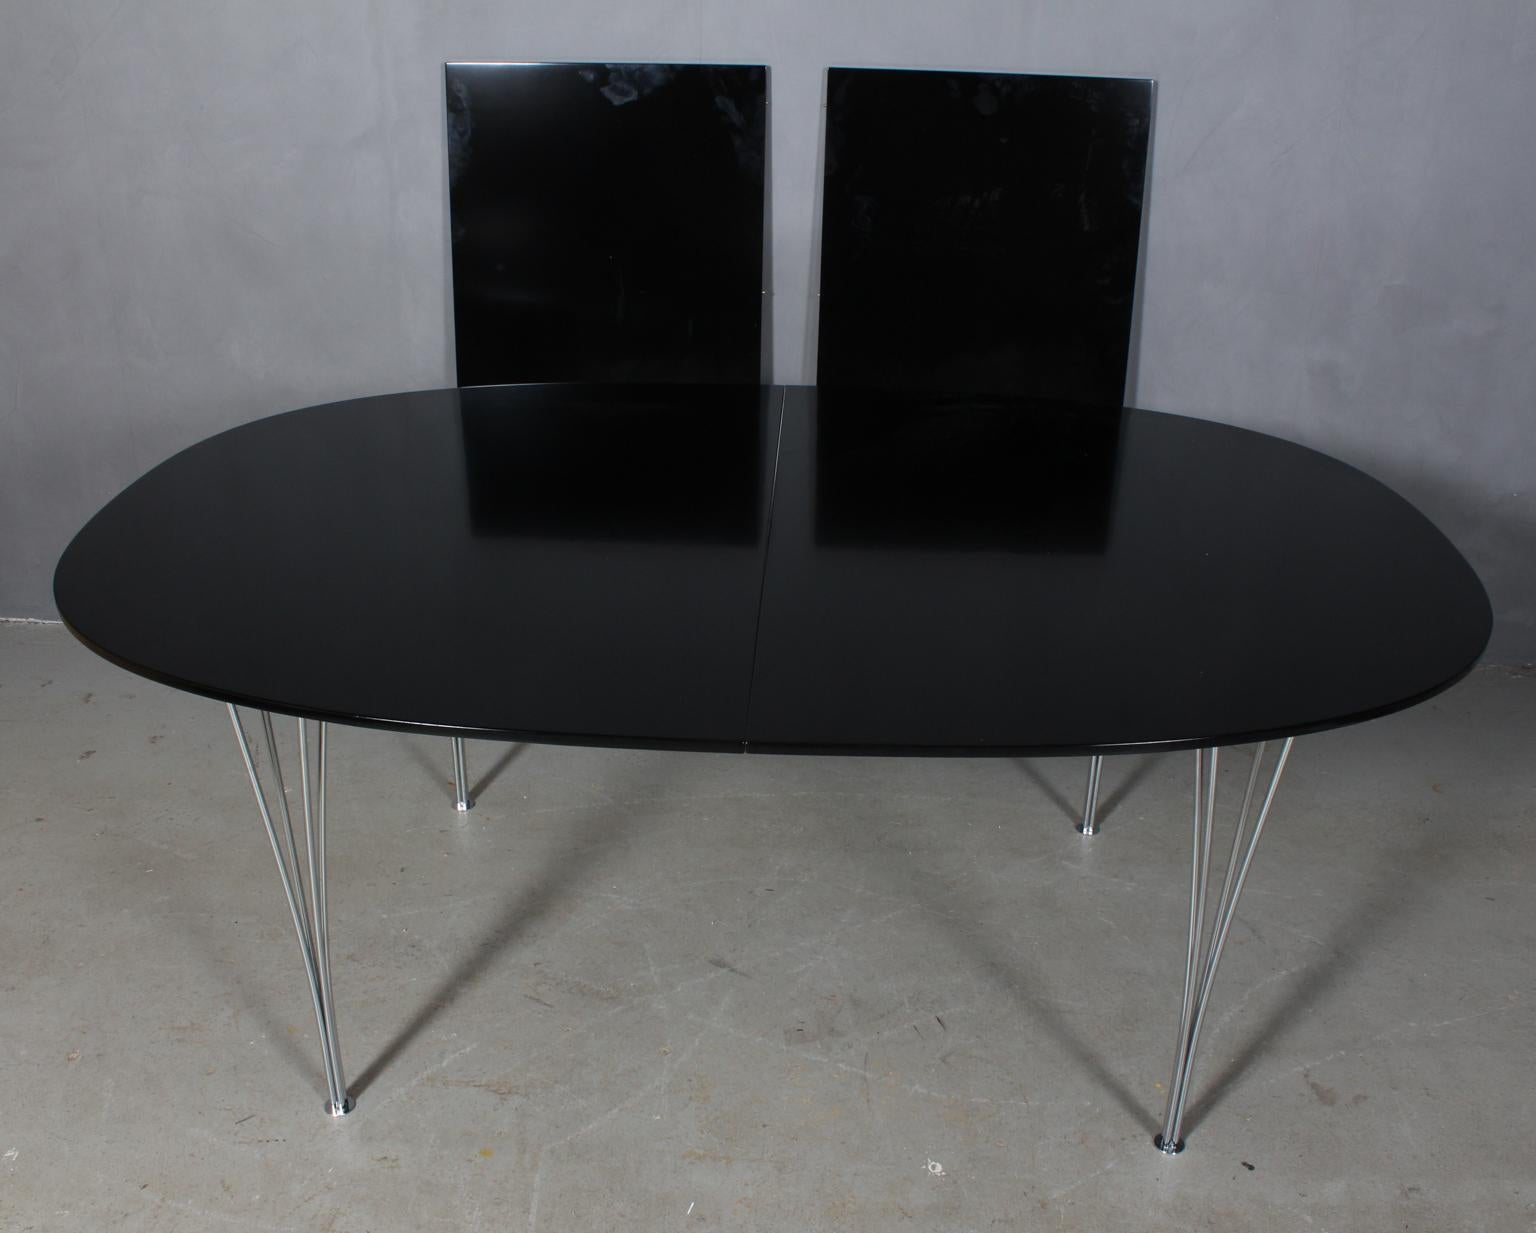 Piet Hein & Bruno Mathsson dining table new laquered black.


Two extension leaf of 60 cms.

Legs of chromed metal.

Model Super Elipse, made by Fritz Hansen.

This is one of the most iconic tables in Scandinavia.